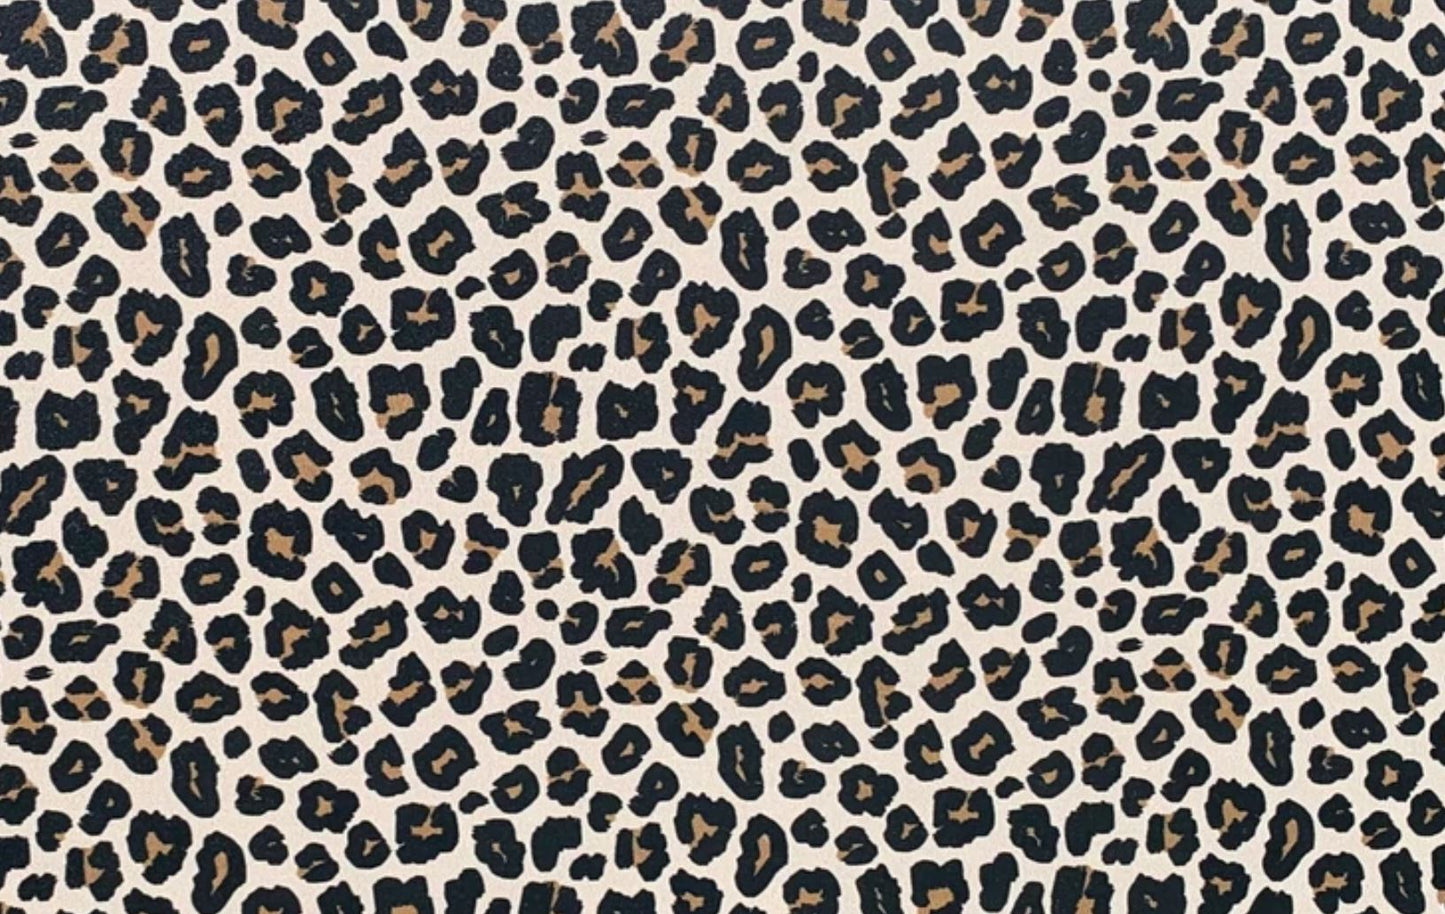 Traditional Leopard- Printed Pattern Designs (Sets)